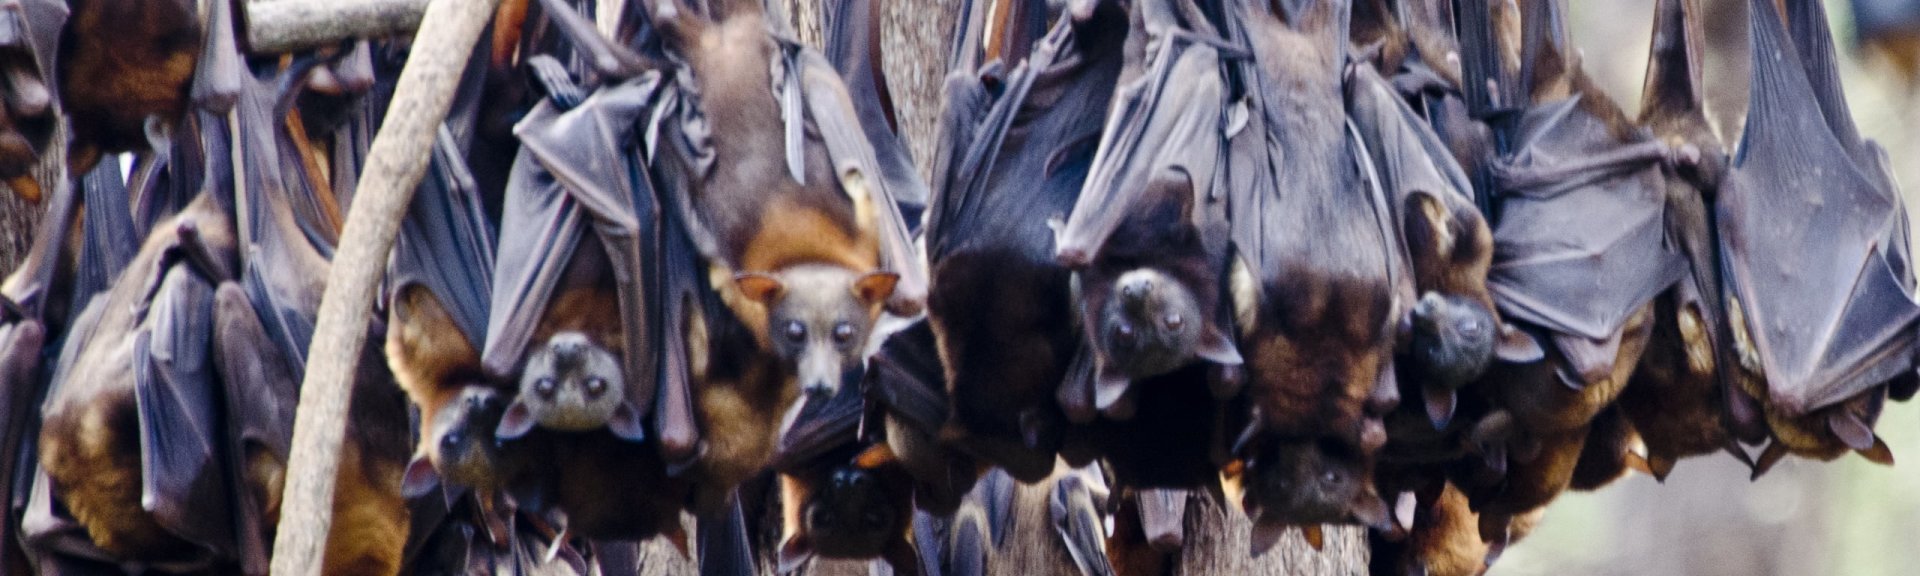 Little red flying foxes hanging out. [Photo](https://flic.kr/p/kMKB4c): [Paislie Hadley](https://www.flickr.com/photos/119661606@N06/) / [CC BY-NC 2.0](https://creativecommons.org/licenses/by-nc/2.0/)